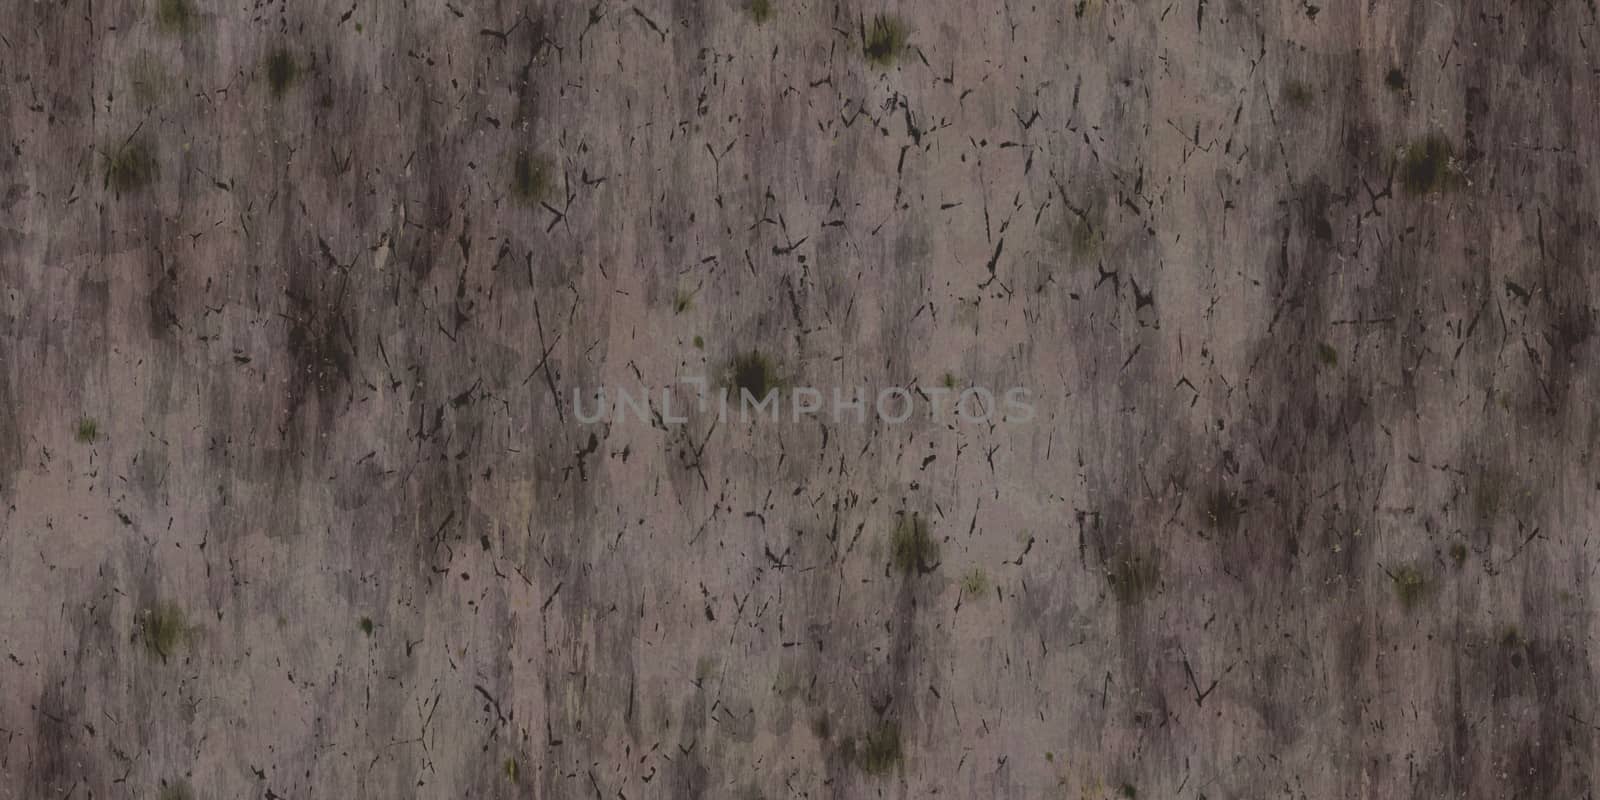 Dirty Dark Seamless Smooth Concrete Background. Polished Urban Cement Wall Texture.